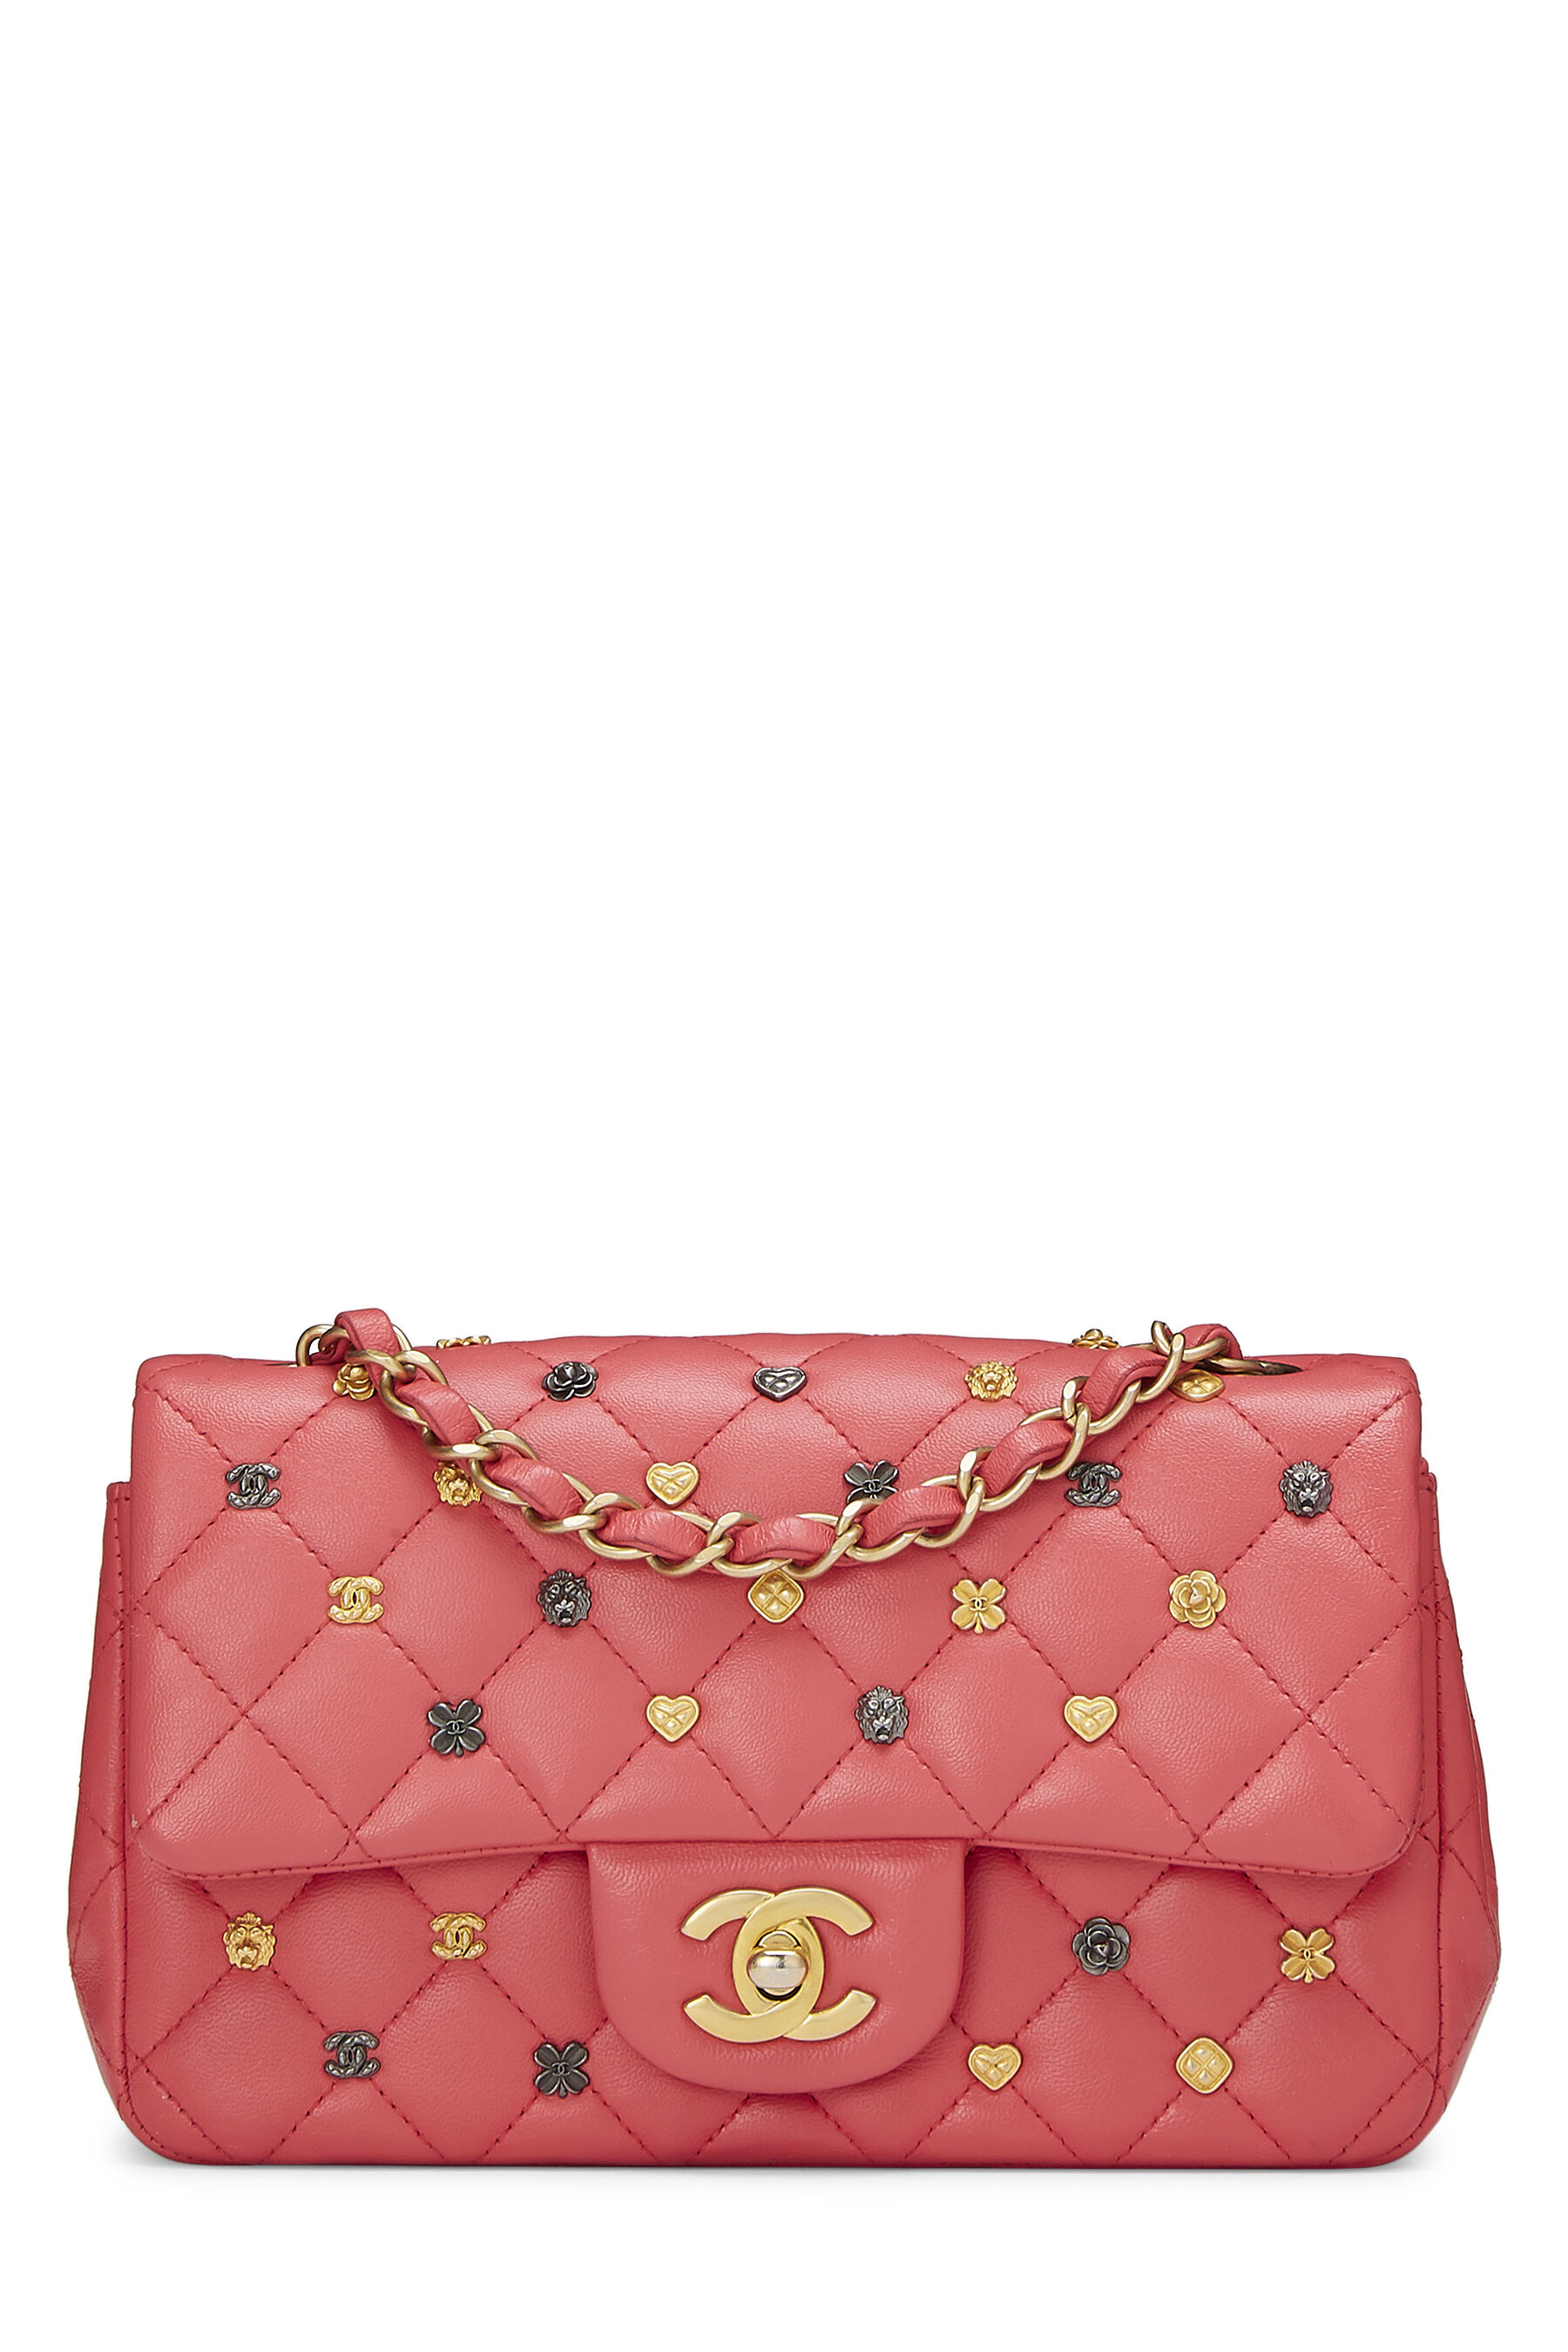 CHANEL Classic Flap Pink Bags & Handbags for Women, Authenticity  Guaranteed